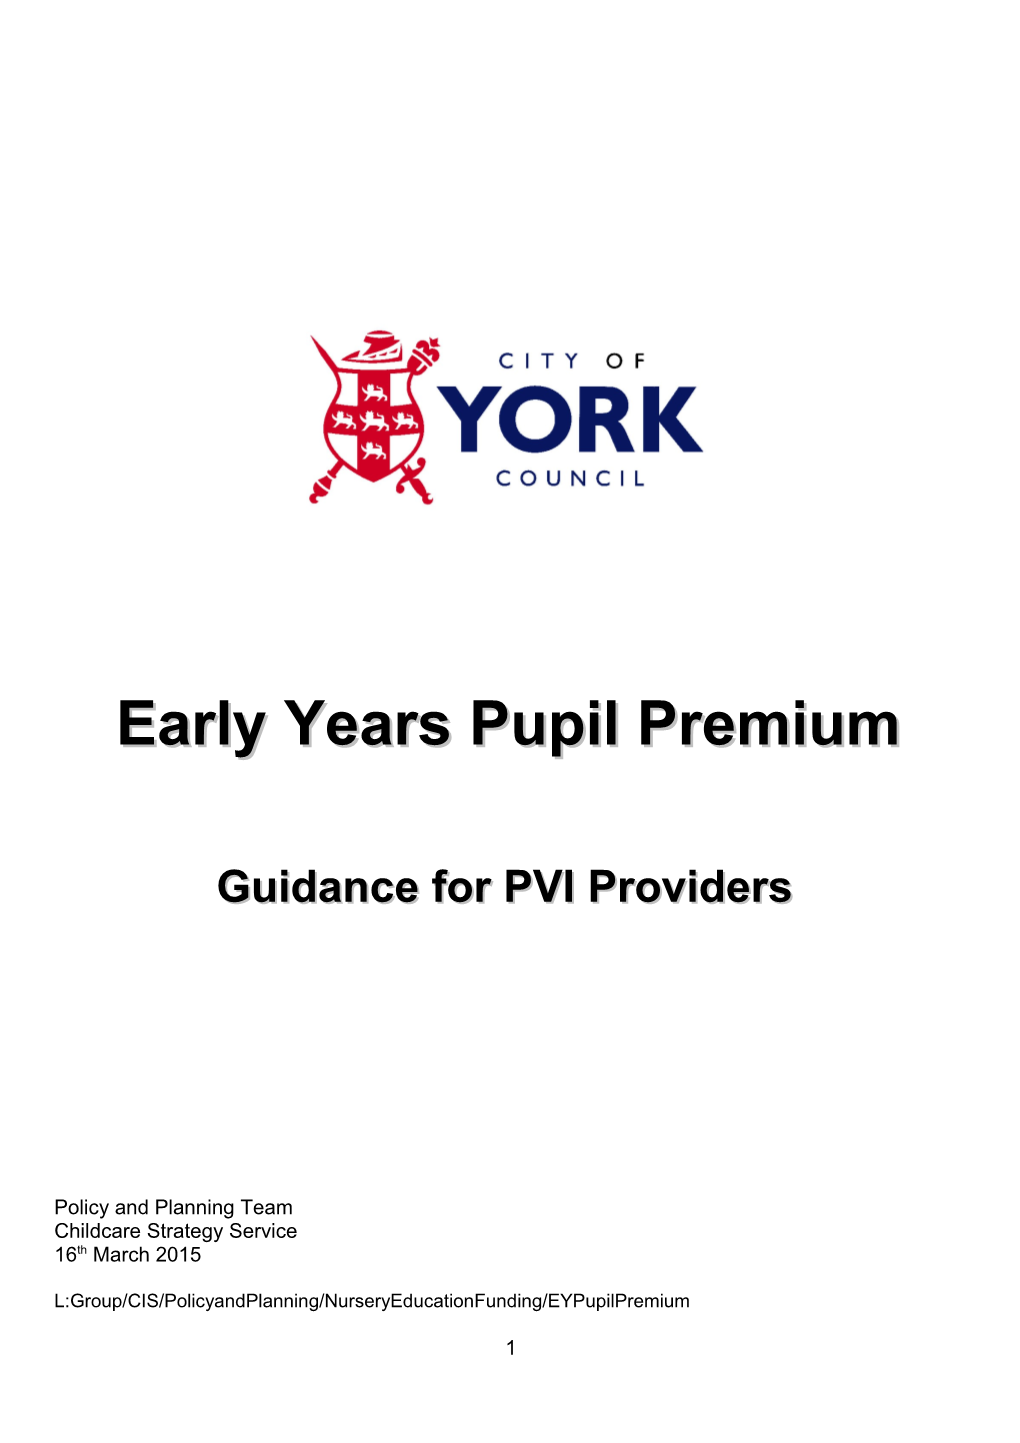 Guidance for PVI Providers